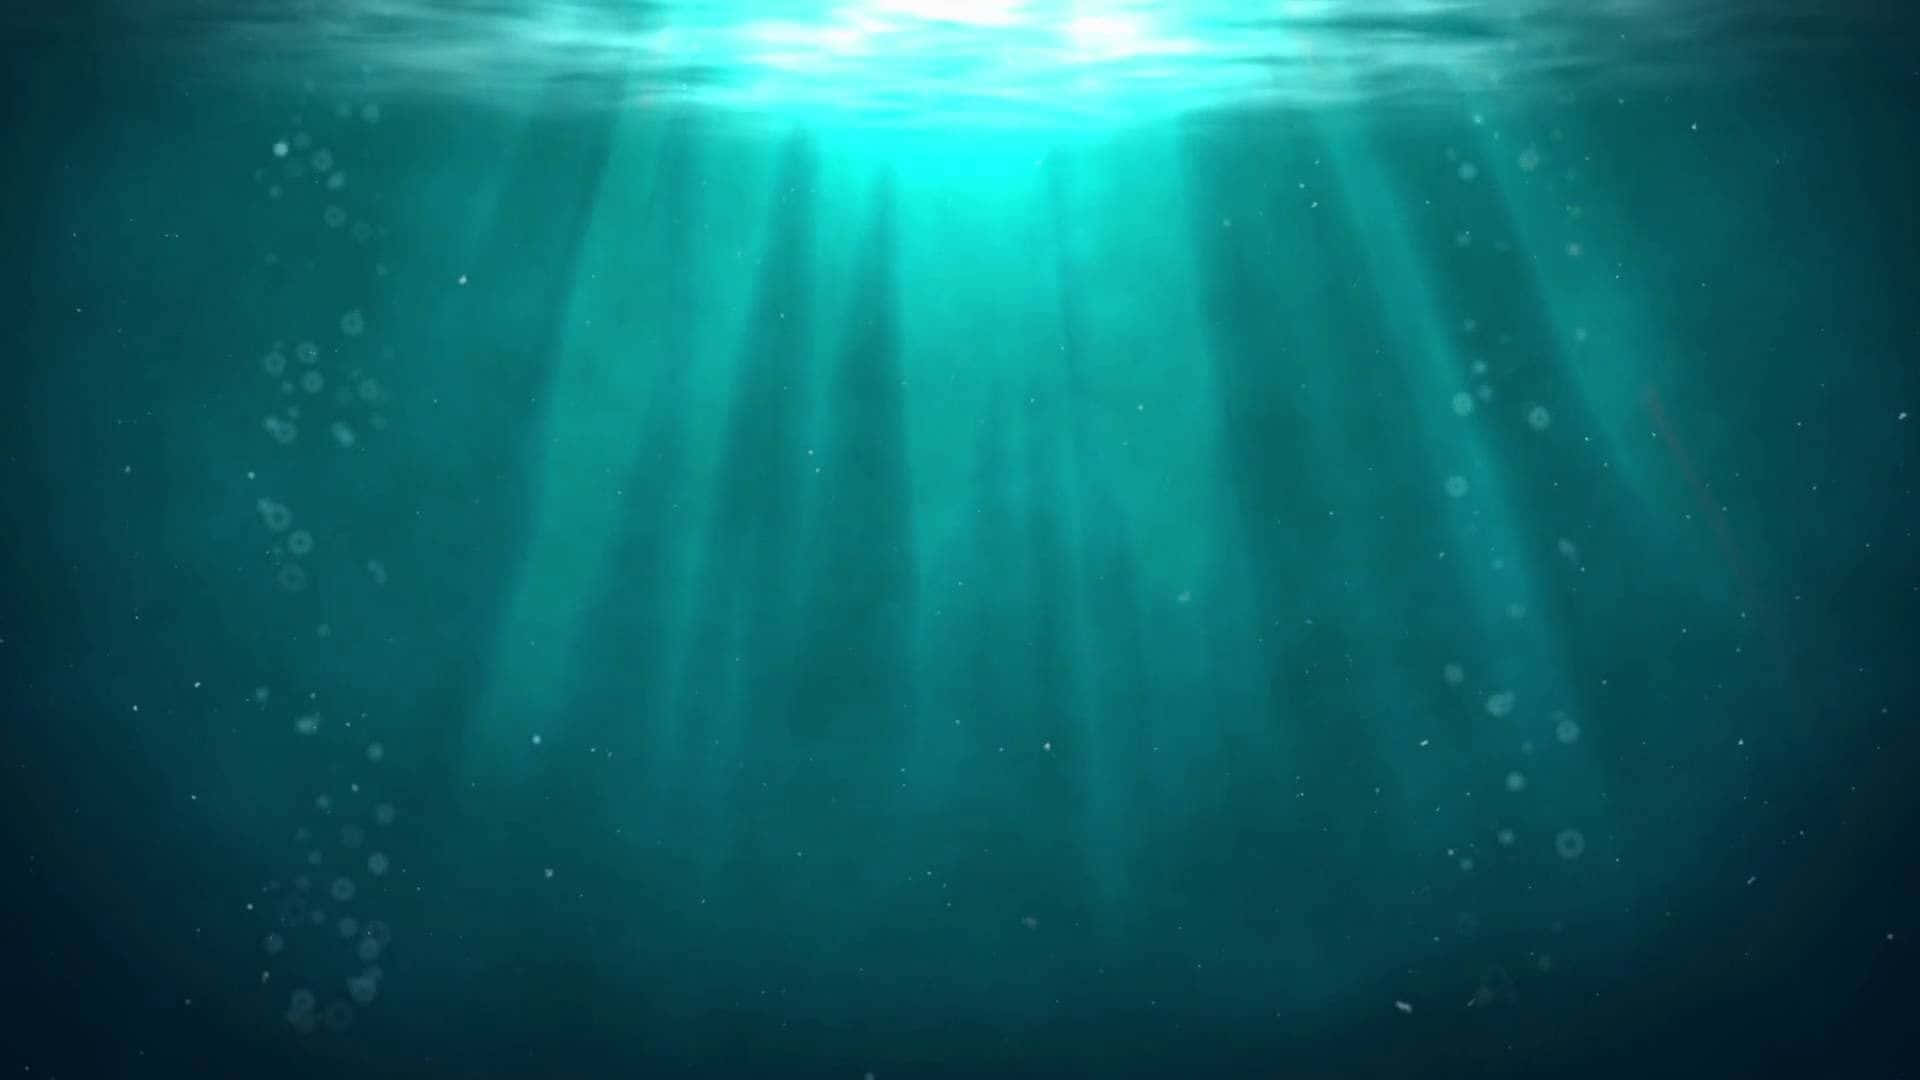 "Under the Sea: Exploring the Depths of the Ocean" Wallpaper